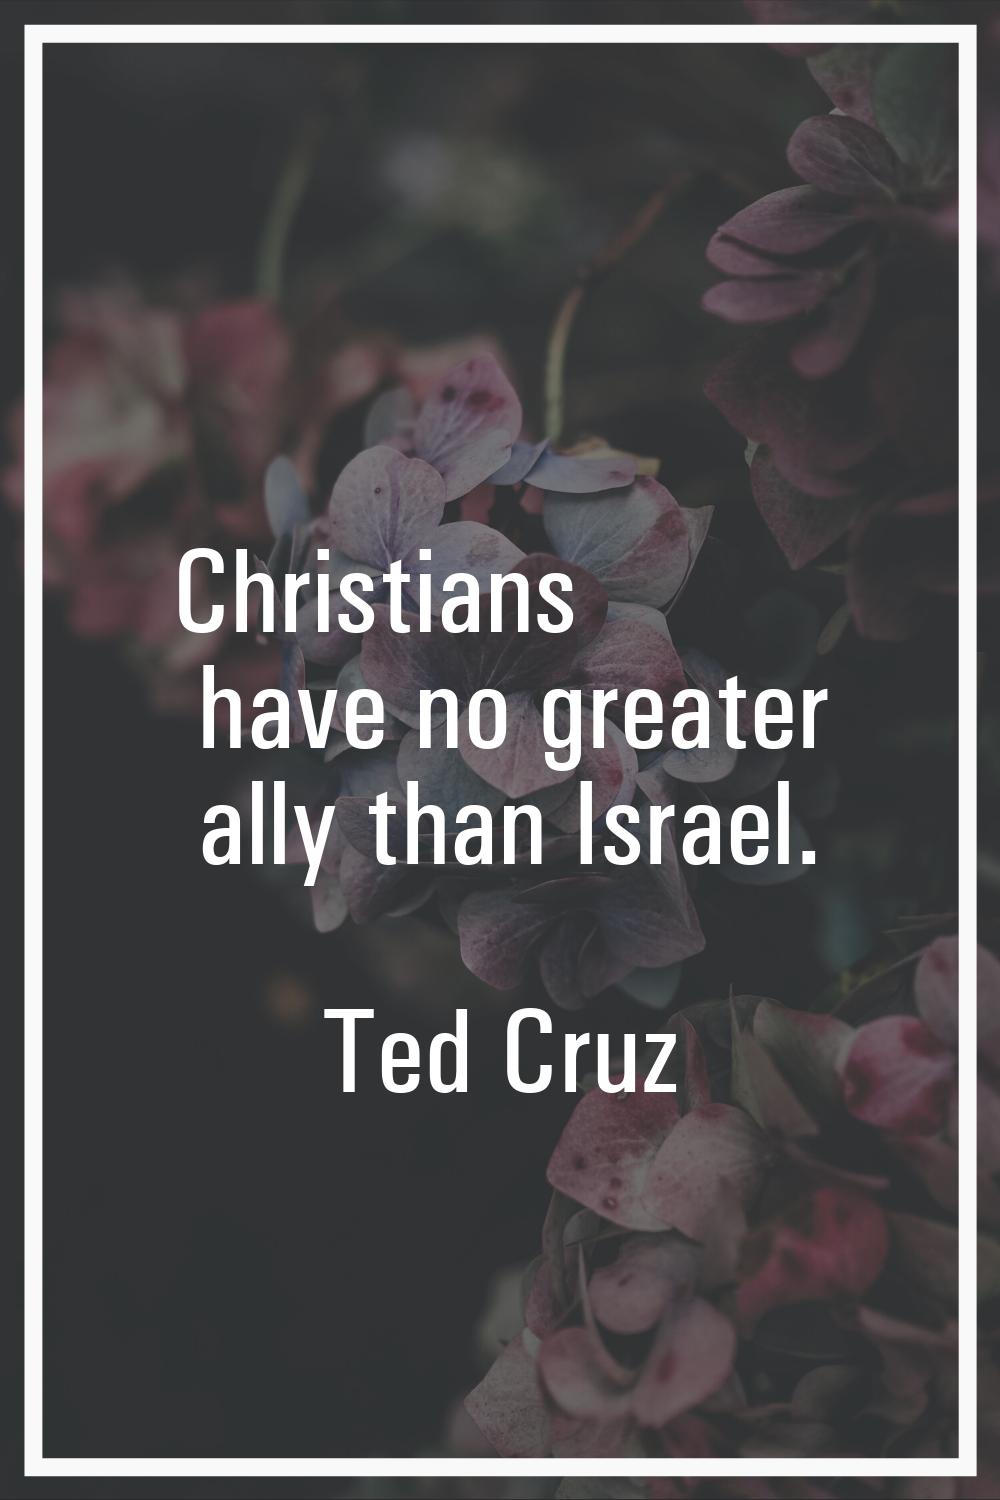 Christians have no greater ally than Israel.